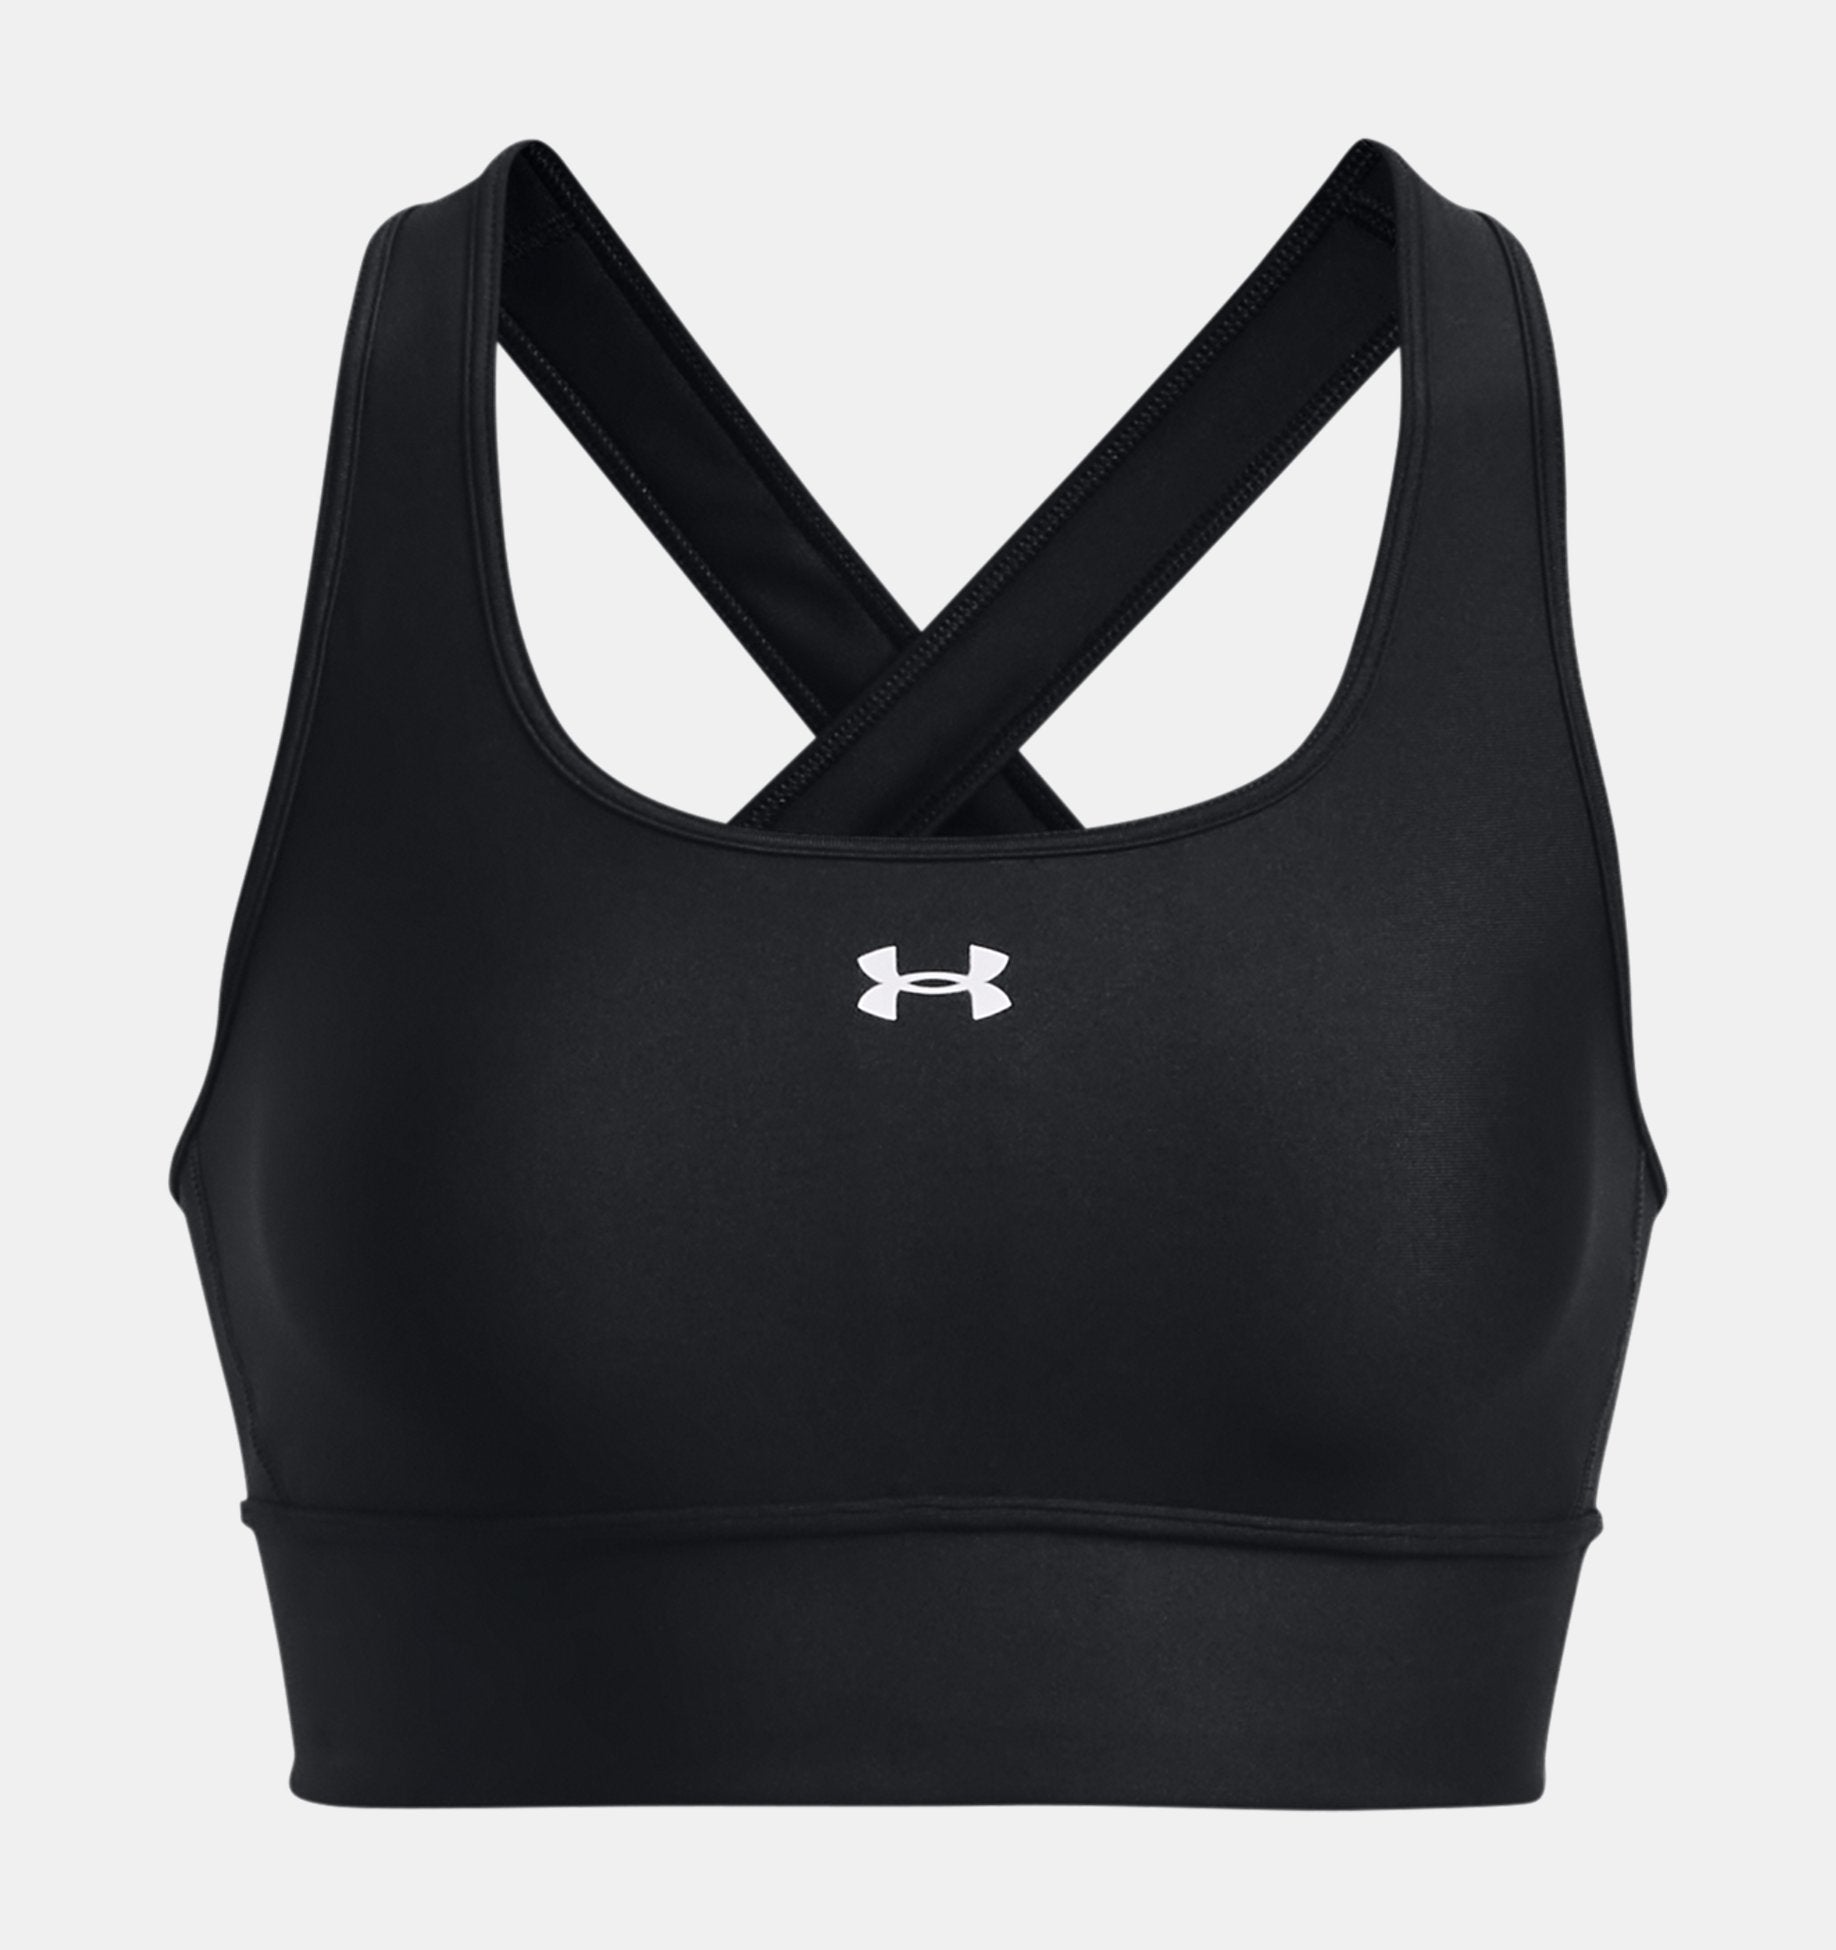 Buy online Racer Back Sports Bra from lingerie for Women by Elina for ₹359  at 64% off